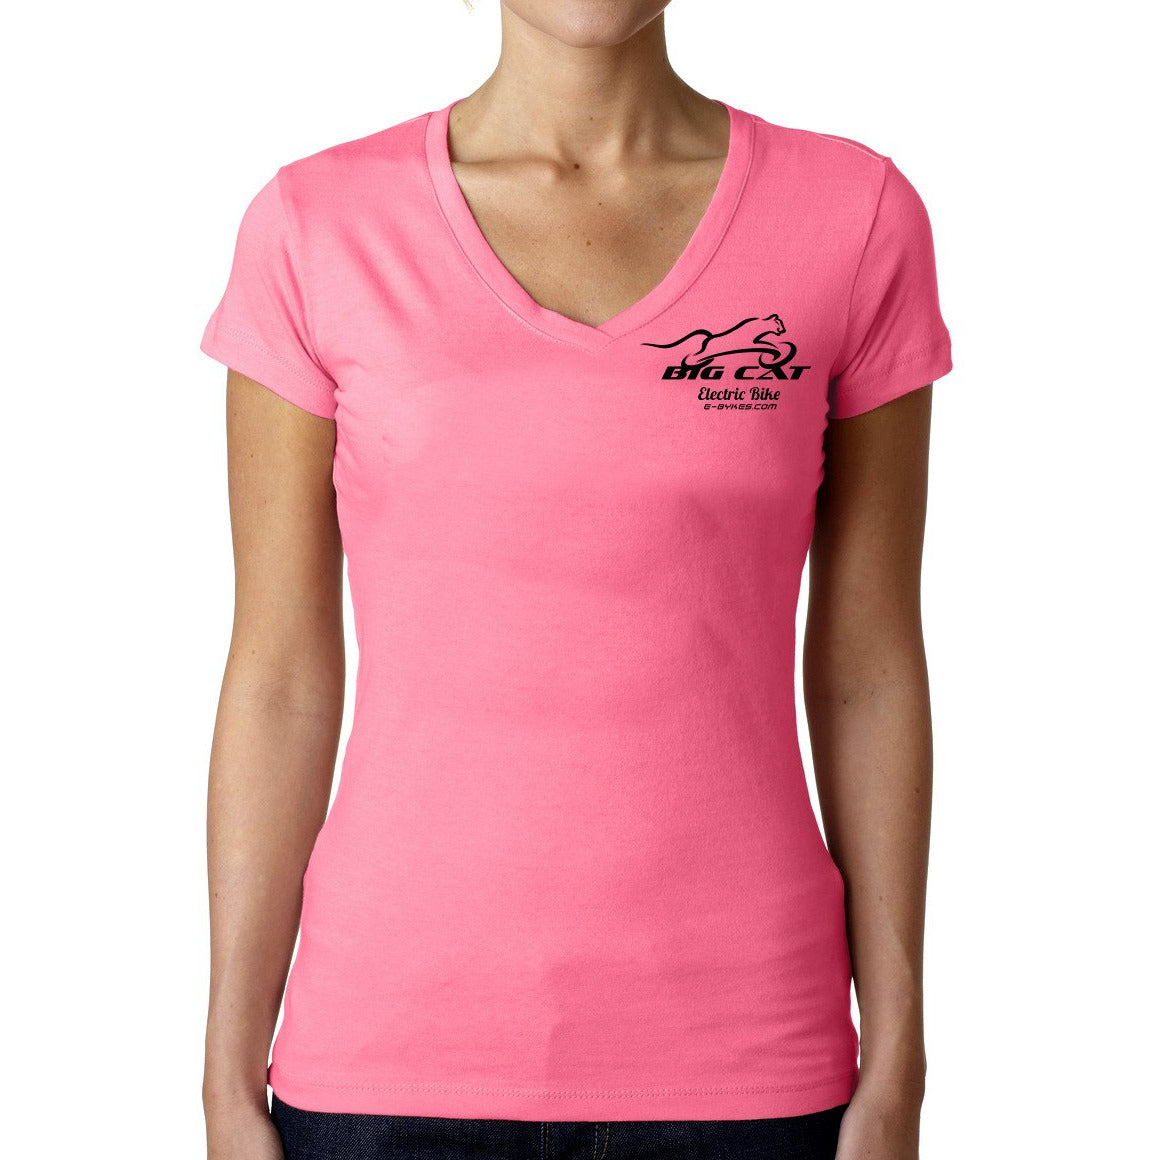 Woman wearing bright pink v-neck t-shirt with Big Cat logo on left breast